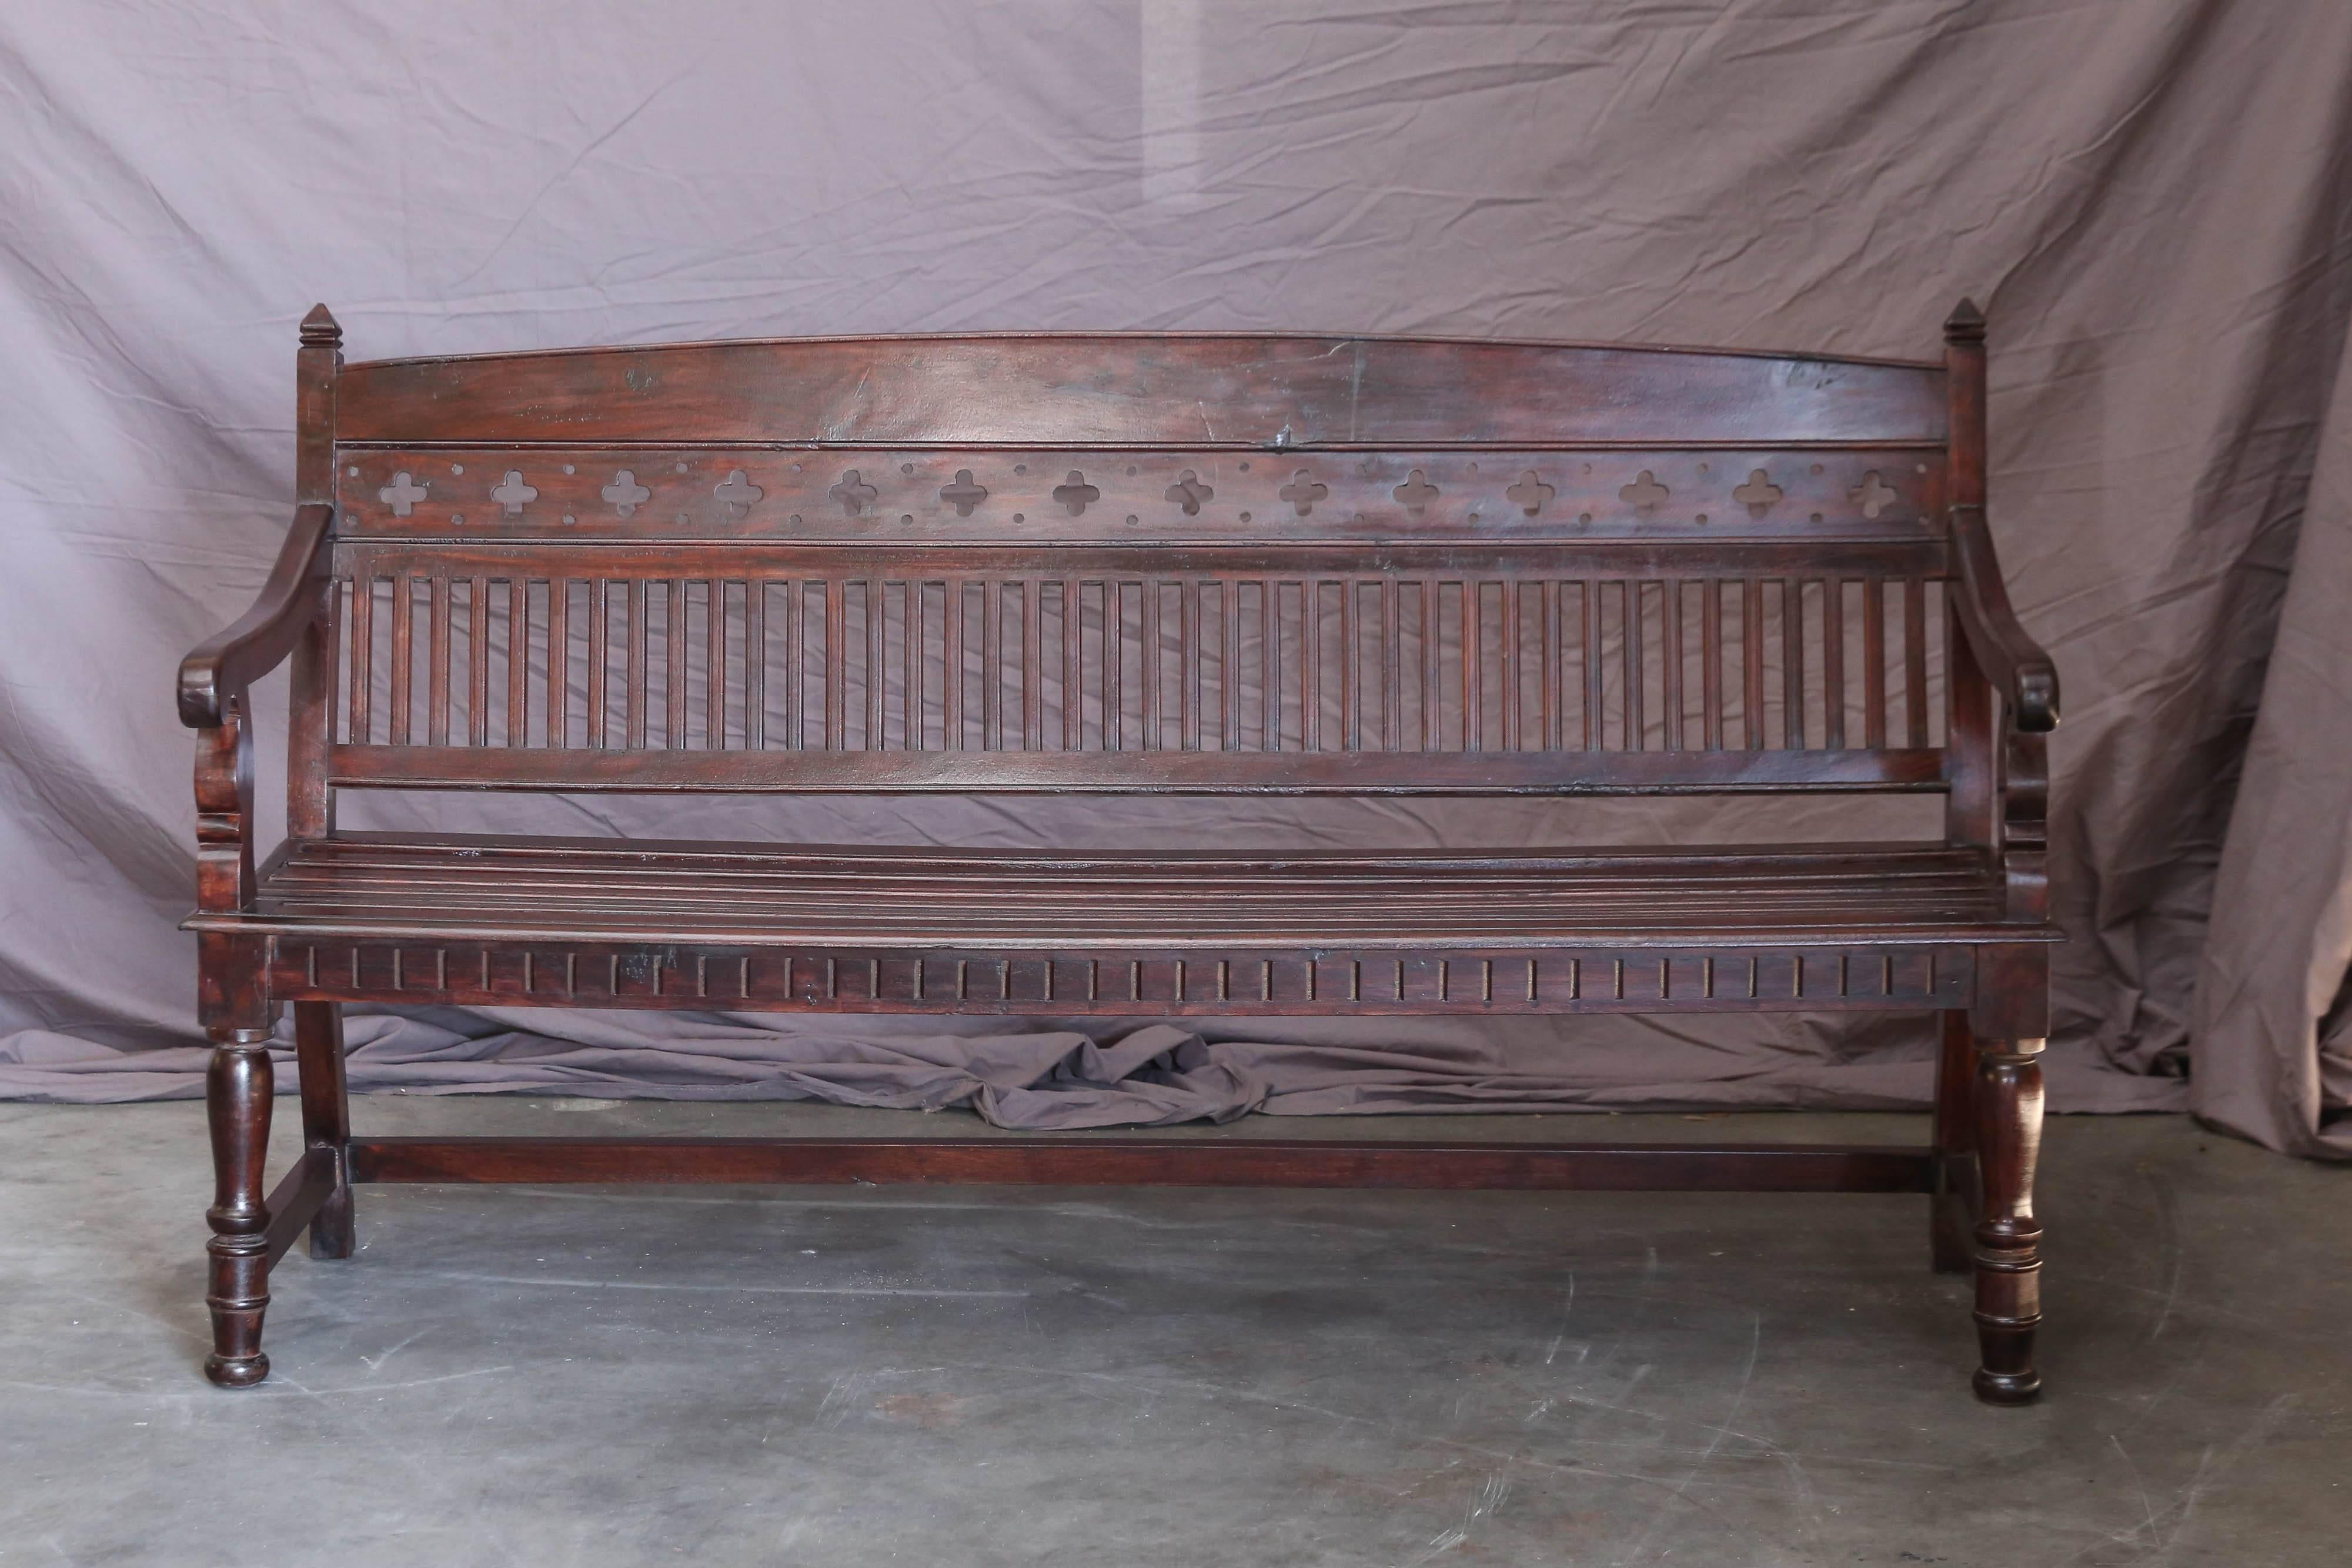 The seat and the back of this bench is shaped for comfort. It is superbly crafted in old world style with religious symbols. It comes from a bishop's abode and is in excellent condition. It is priced low. Will make a great addition to a family room.